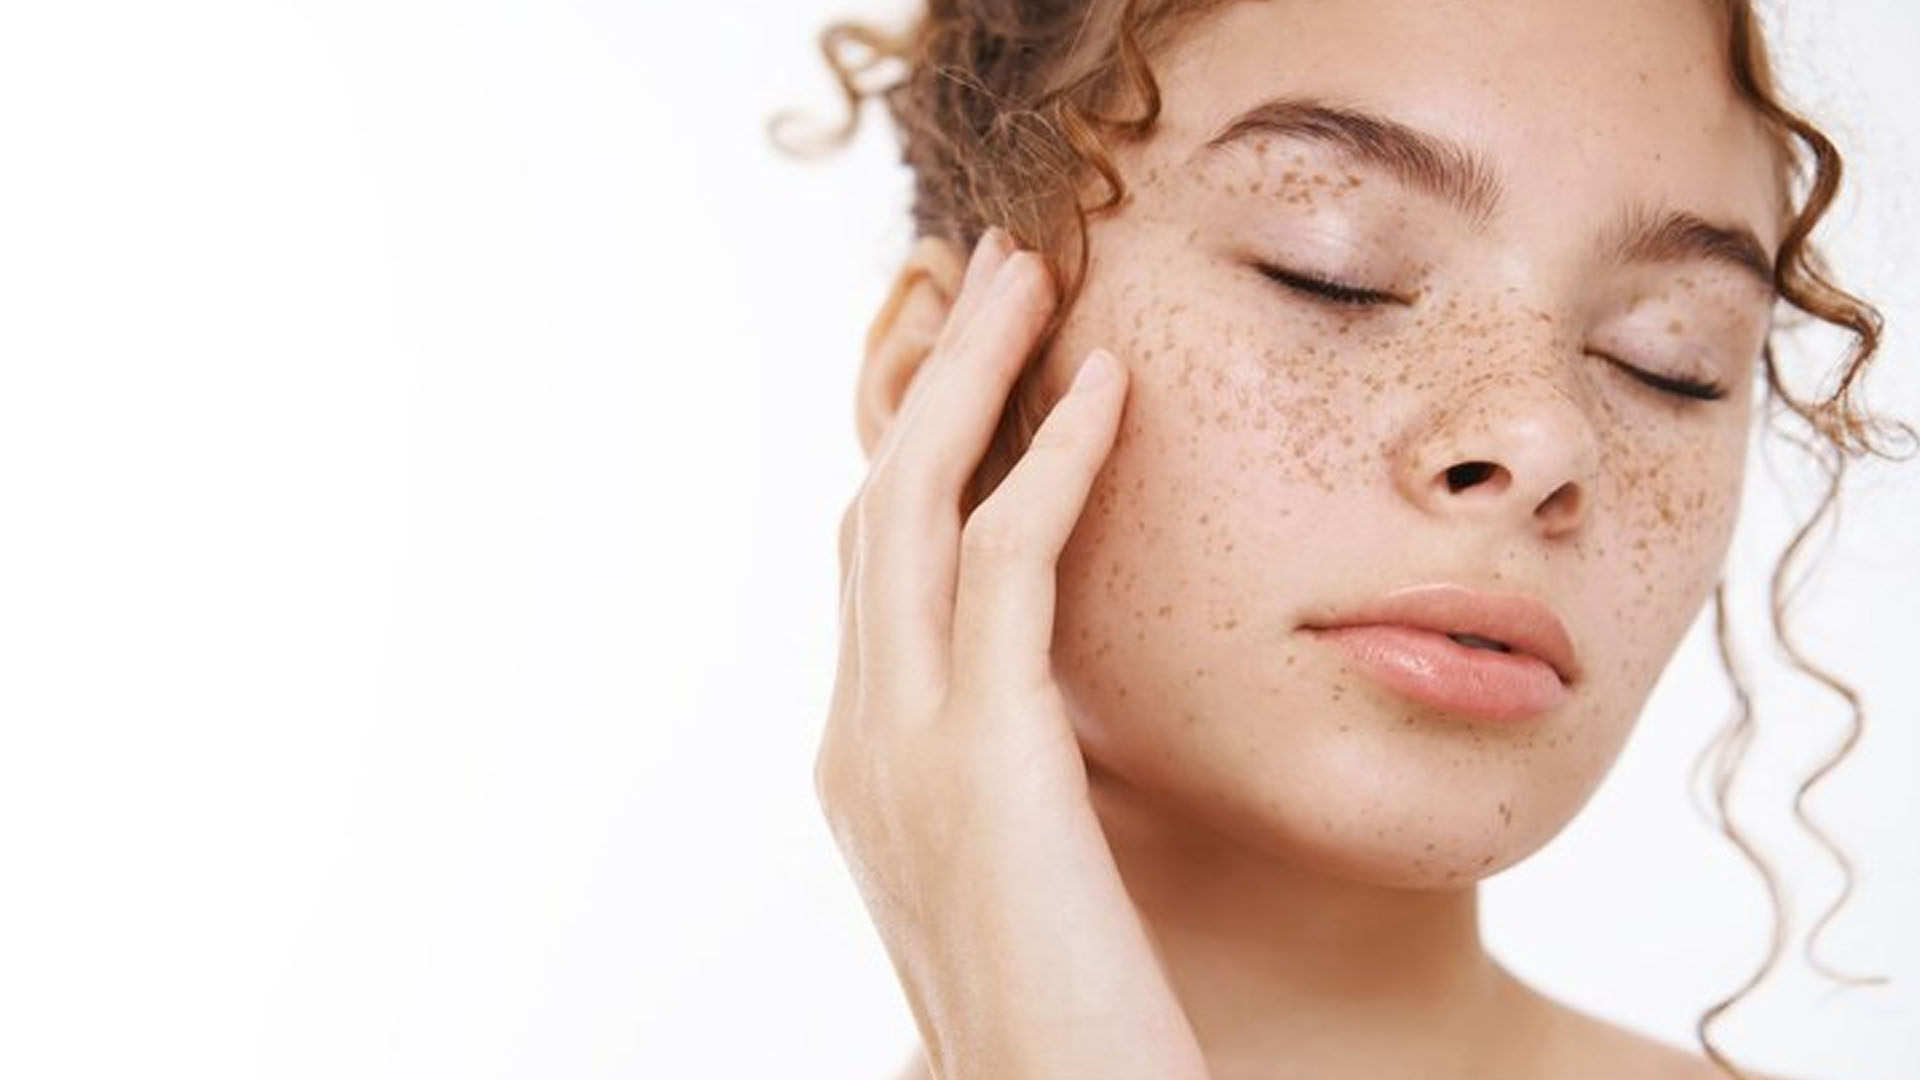 What are the Home Remedies for Melasma?